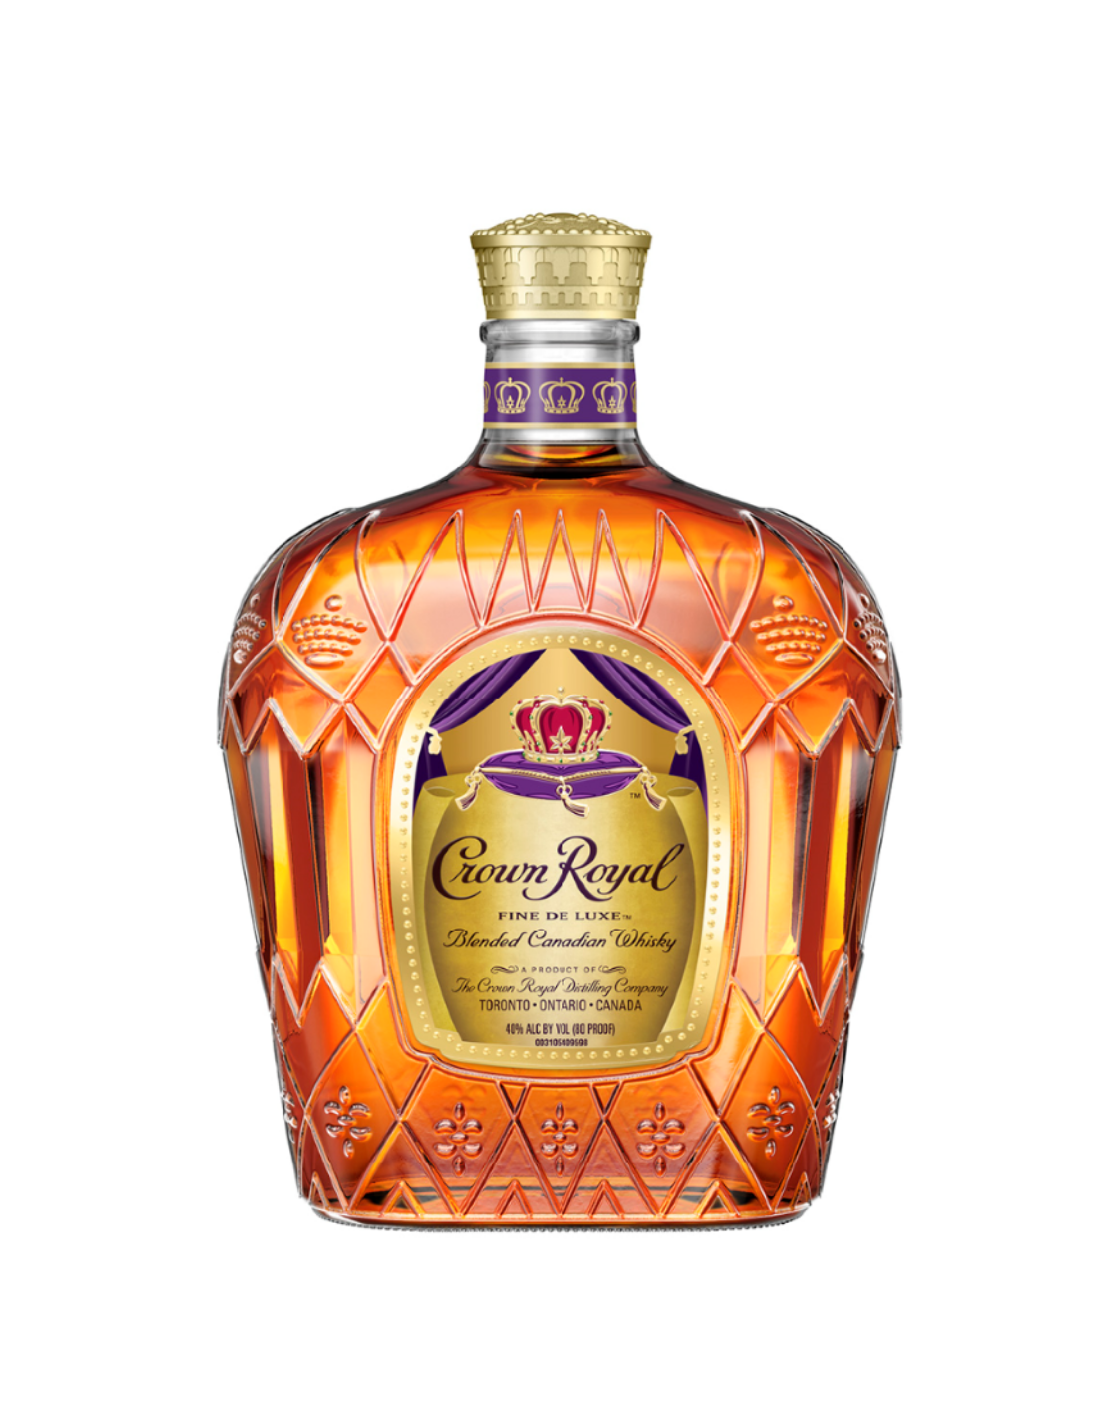 Whisky Crown Royal 1L, 40% alc., Canada alcooldiscount.ro